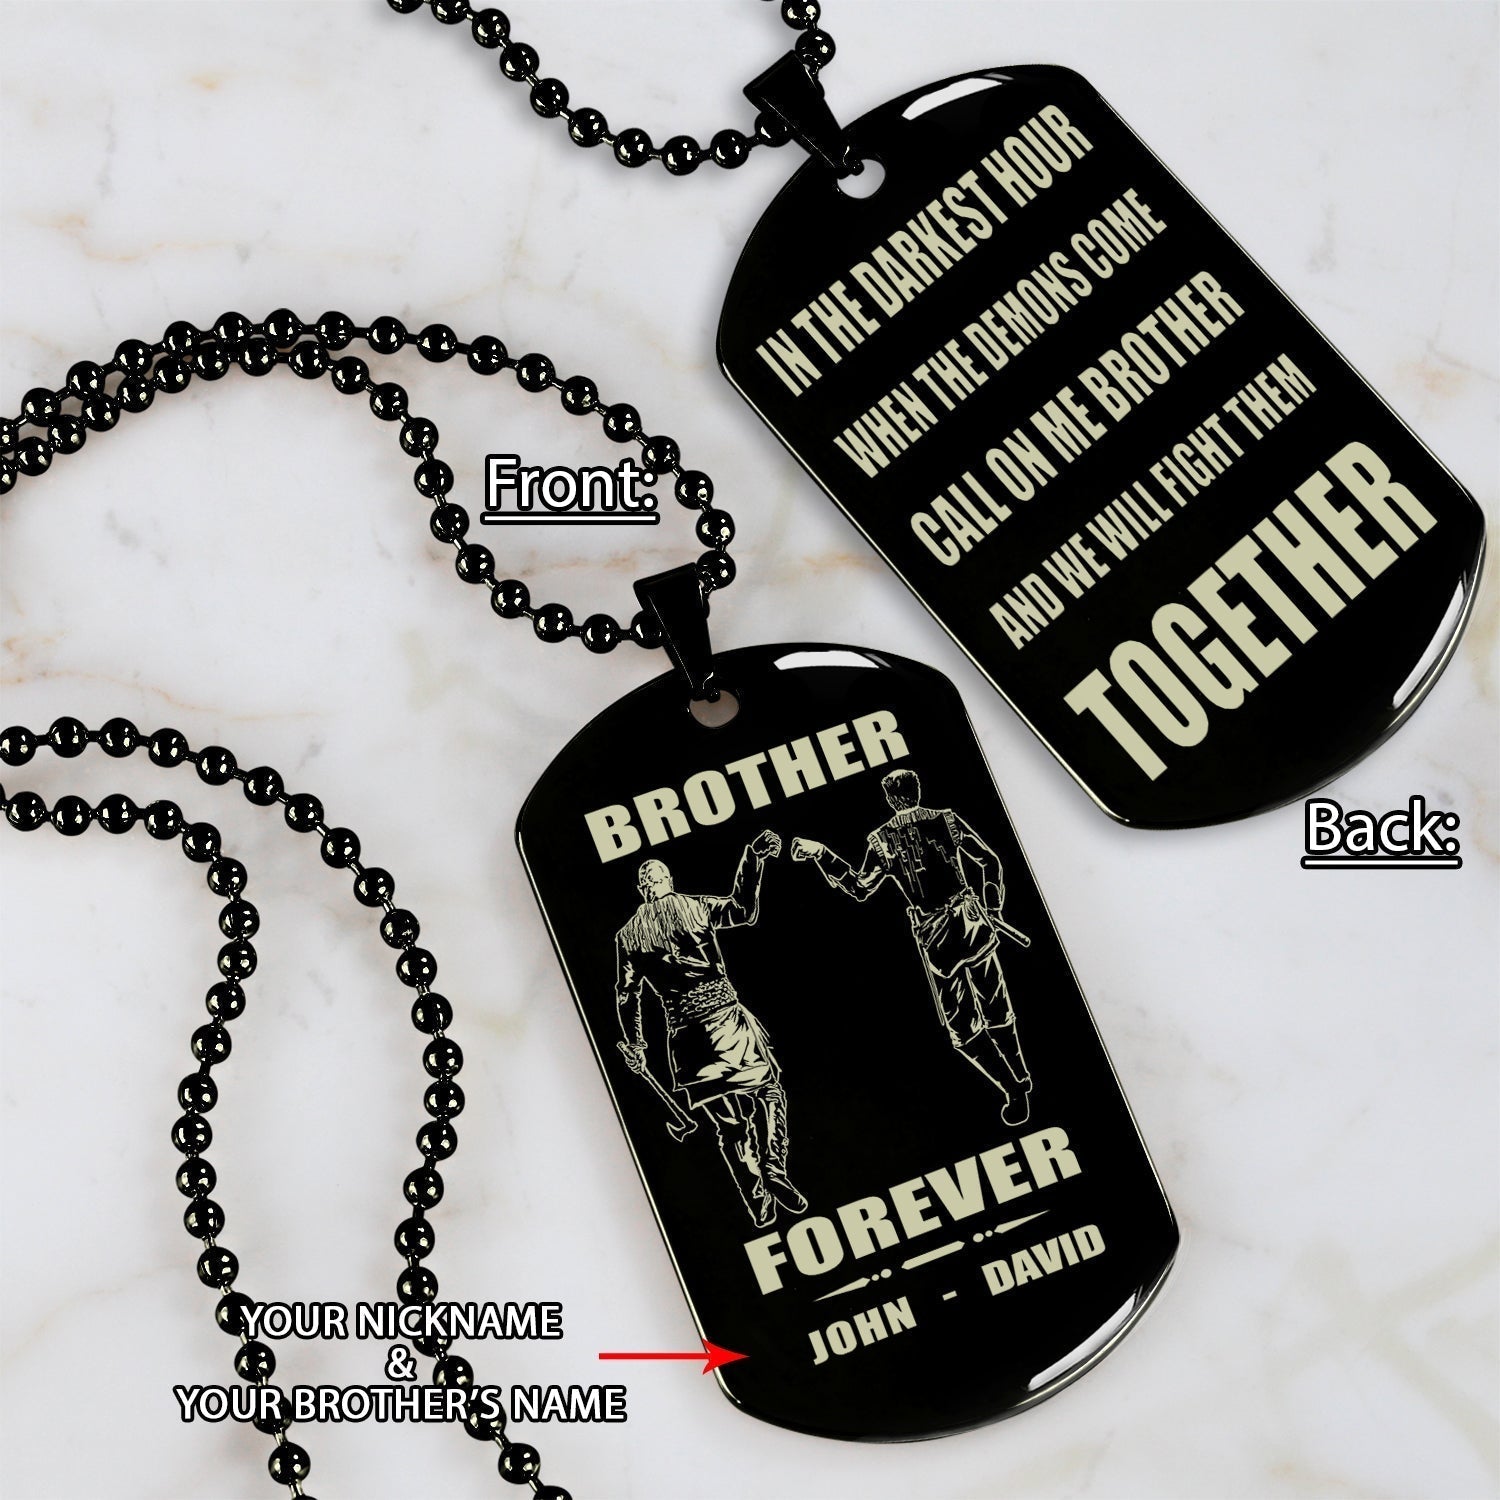 Viking Call on me brother engraved black dog tag double sided. gift for brothers